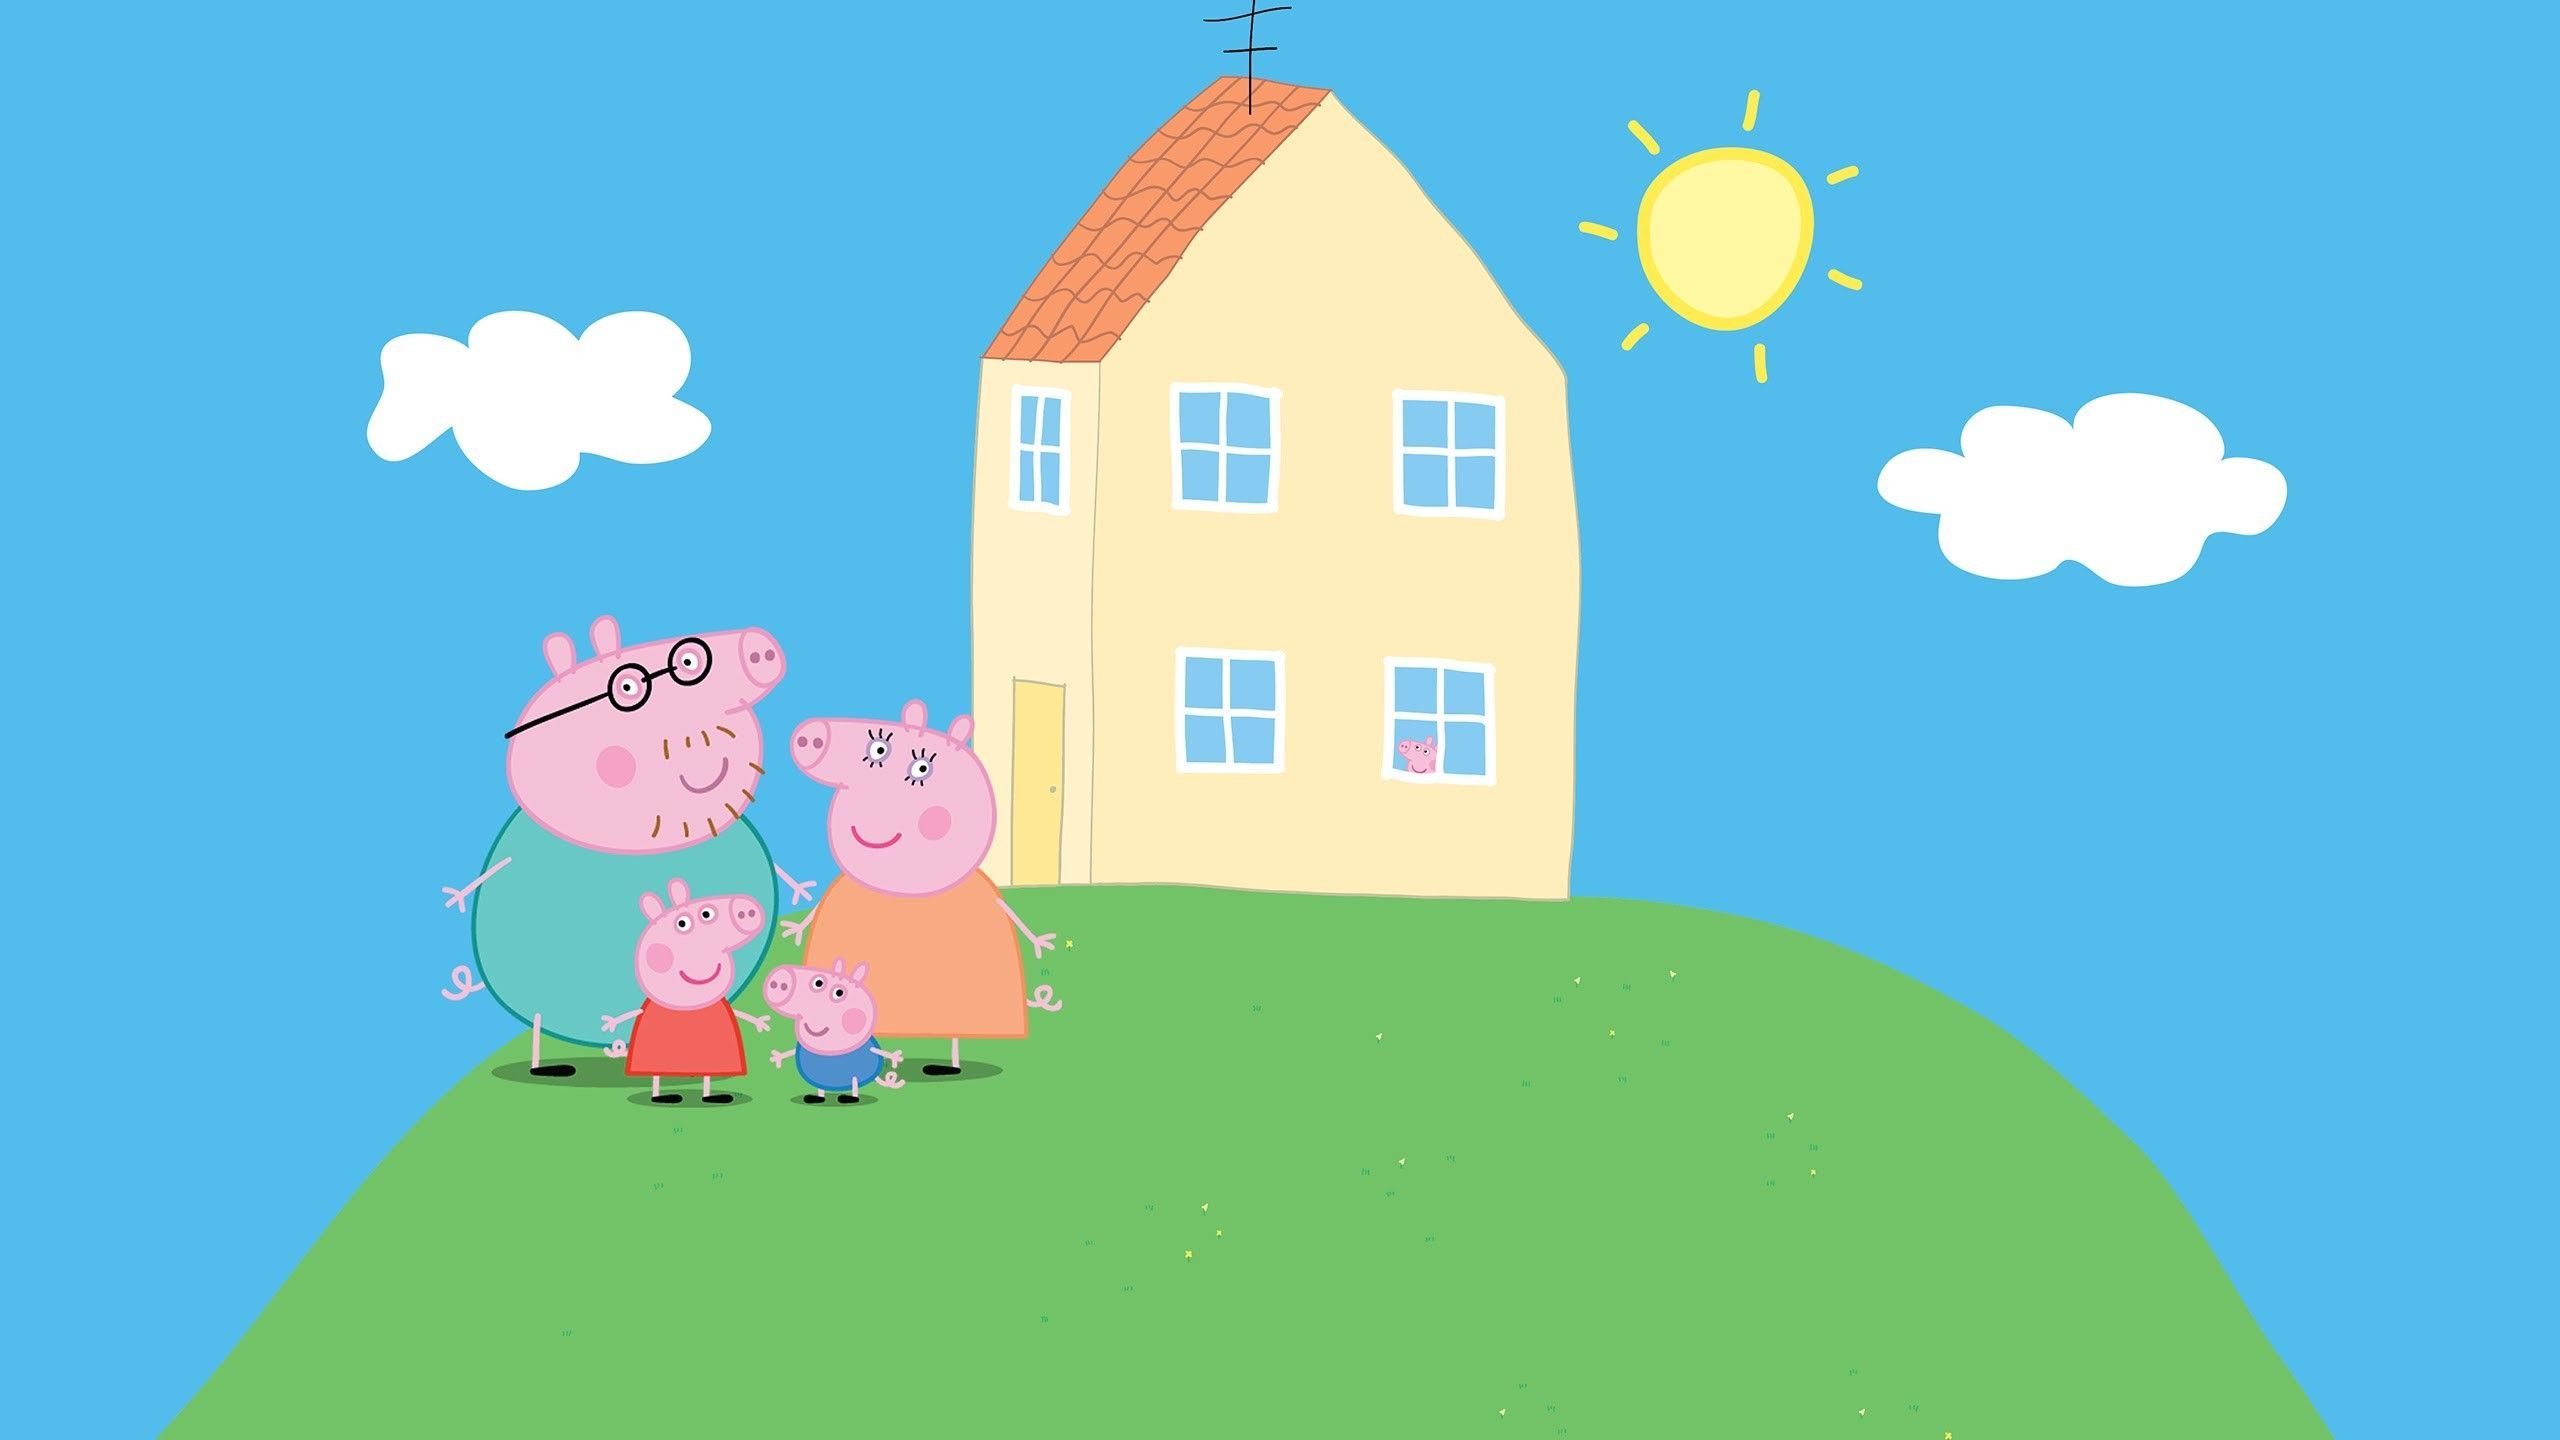 Peppa Pig House Wallpapers.